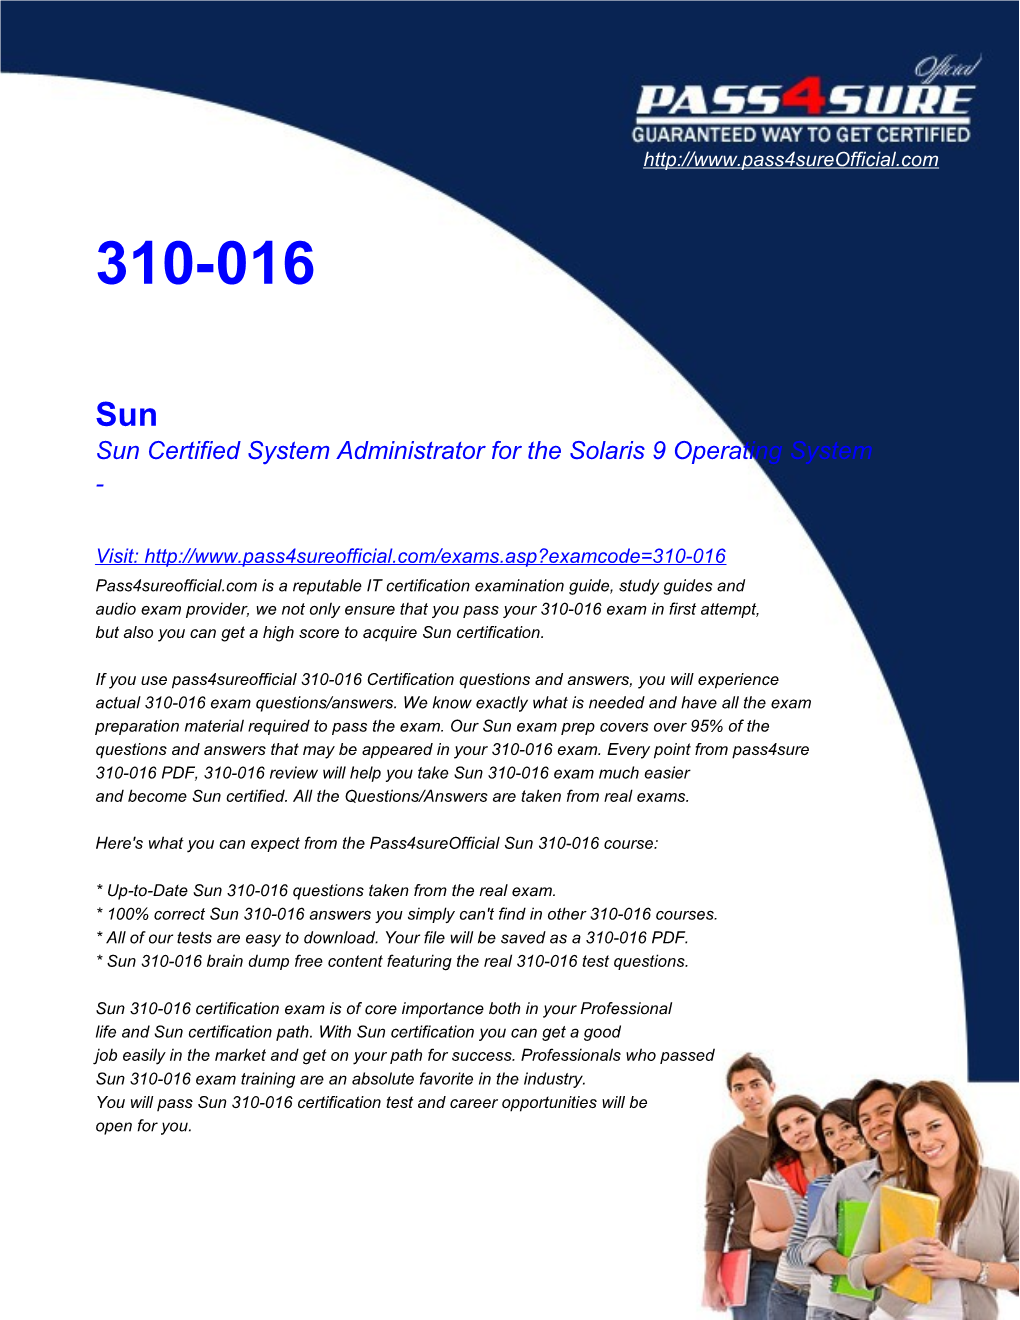 Sun Certified System Administrator for the Solaris 9 Operating System